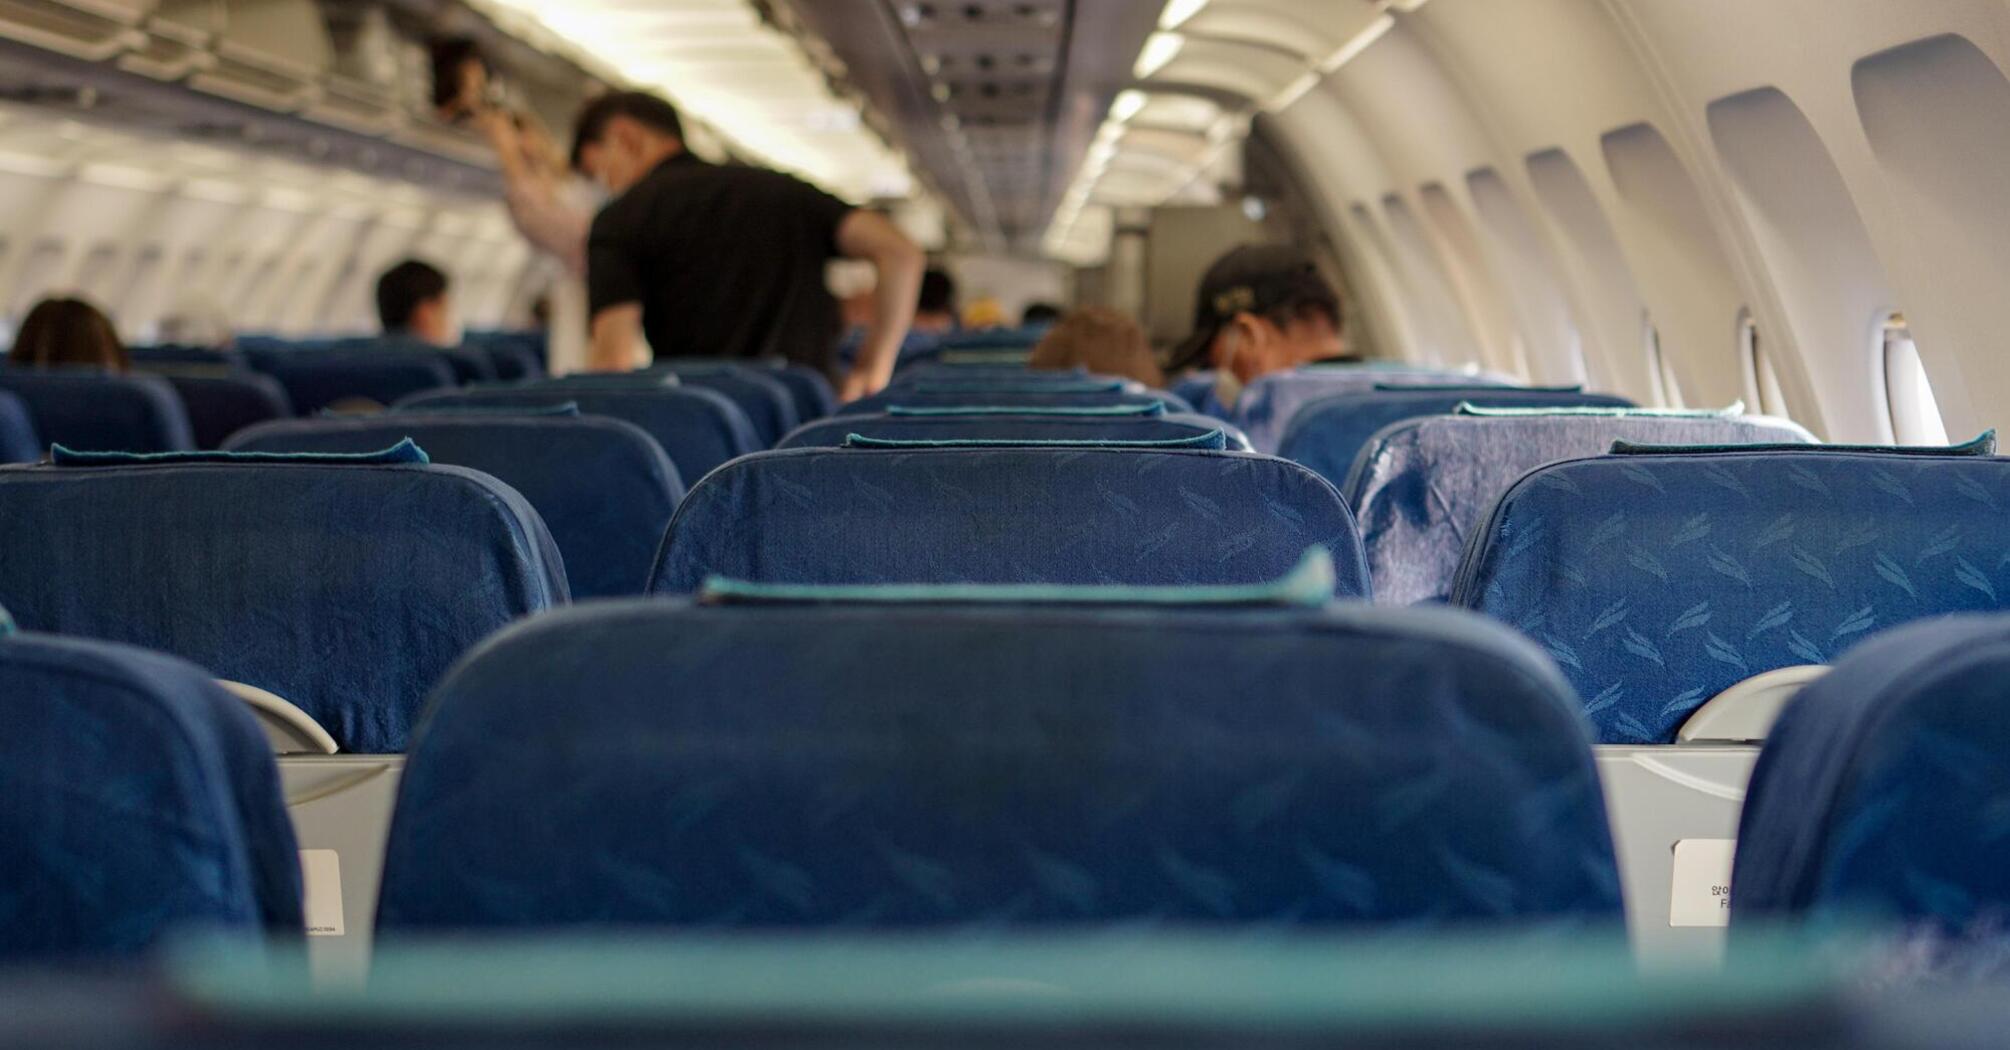 The main rule when flying: Why you should keep your seat upright during takeoff and landing